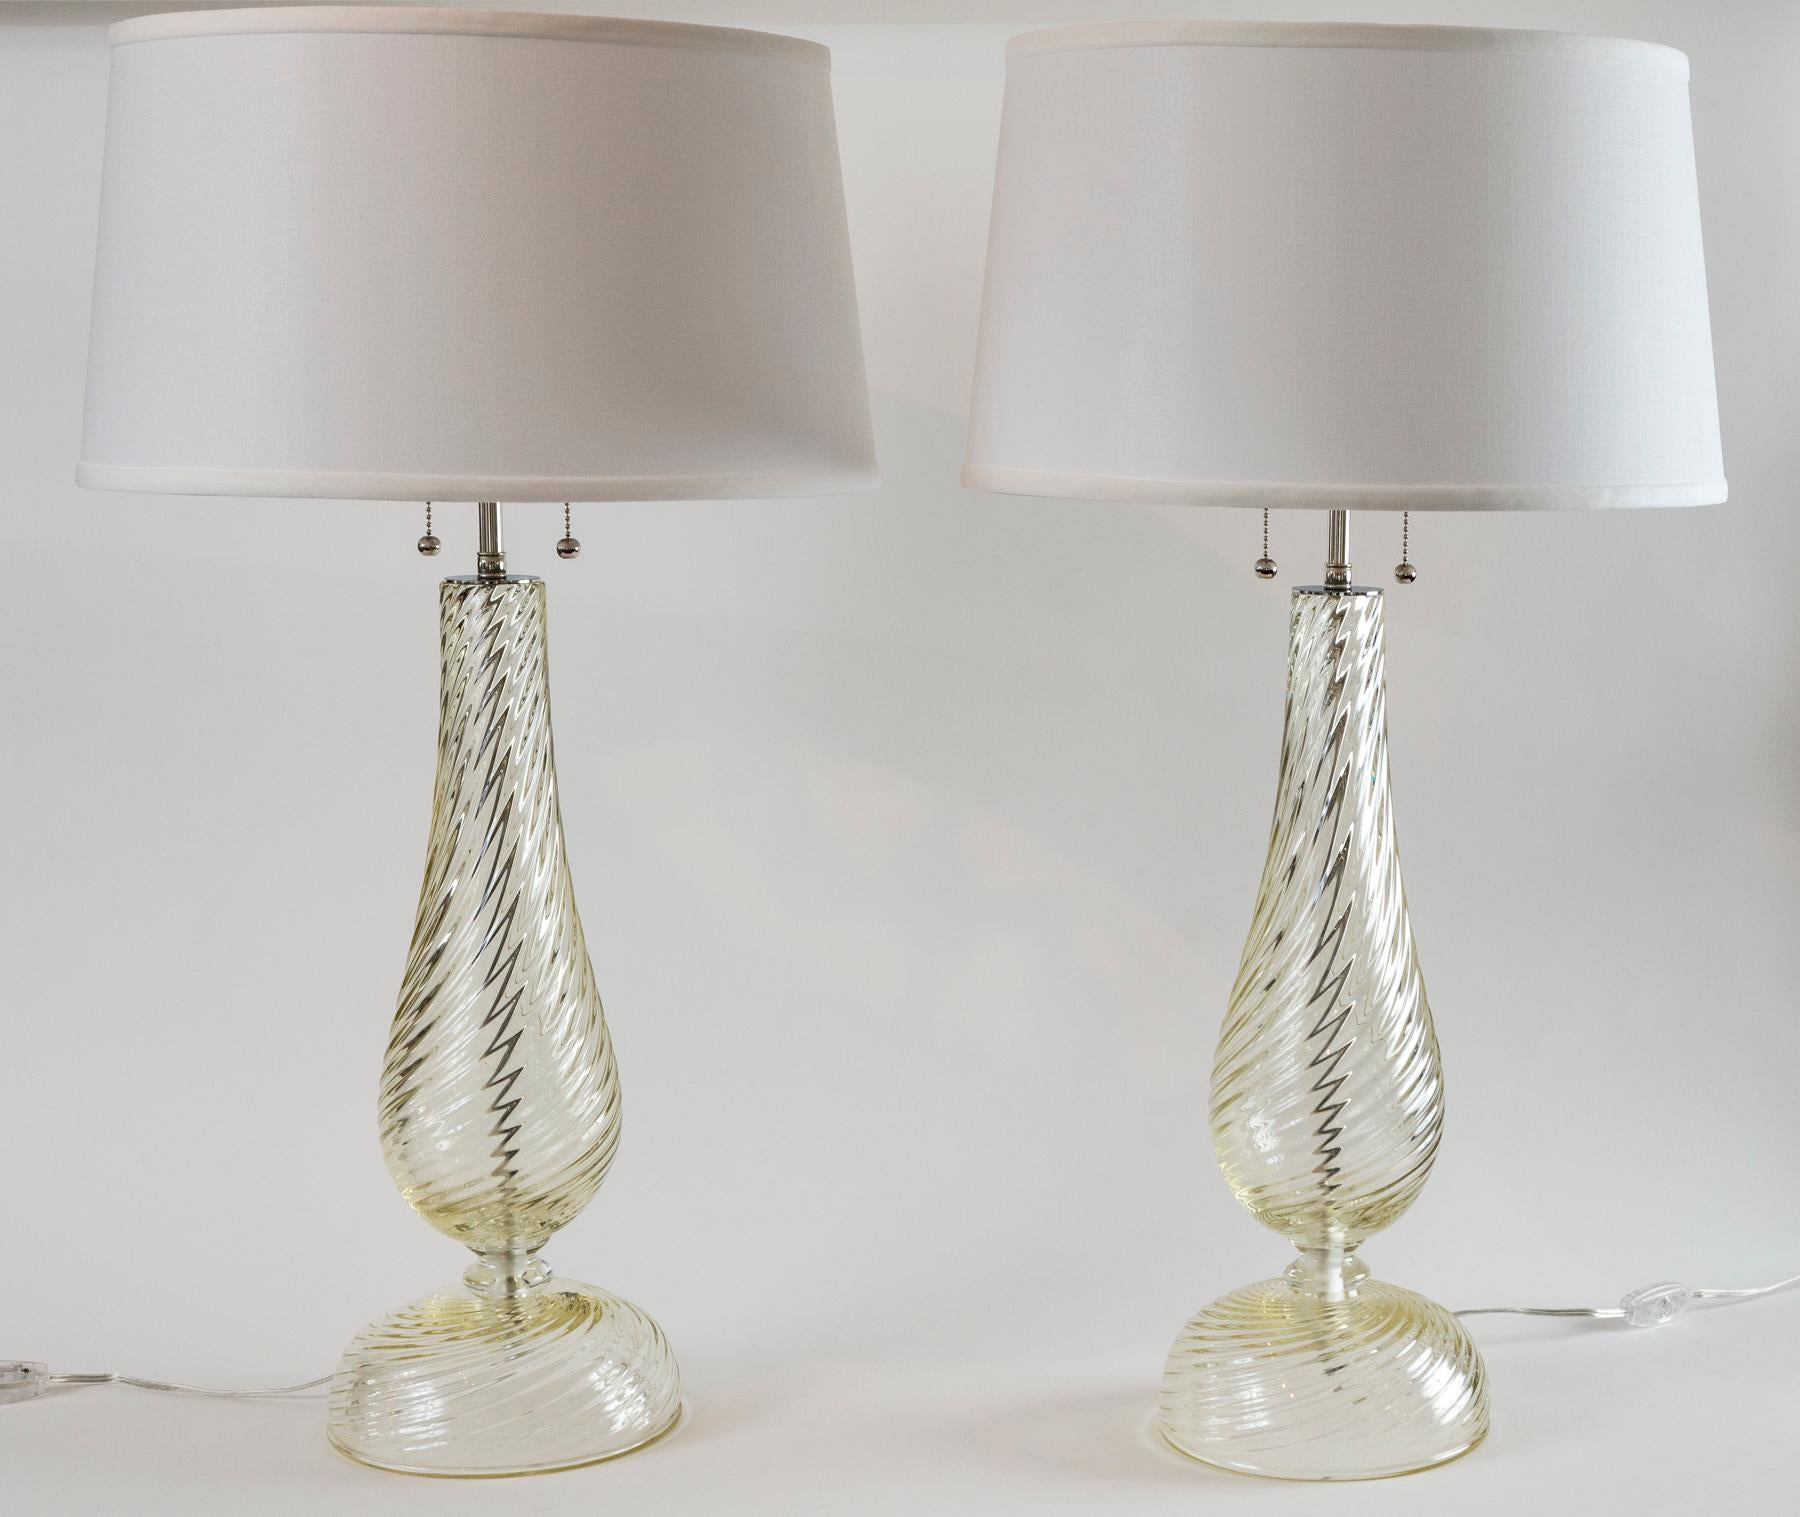 A lovely pair of delicately proportioned swirl blown lamps with a touch of citrine to make these appear more ample. These lamps are a modernized version of your classical baluster shaped table lamps.

Electrified to code with UL approved parts,